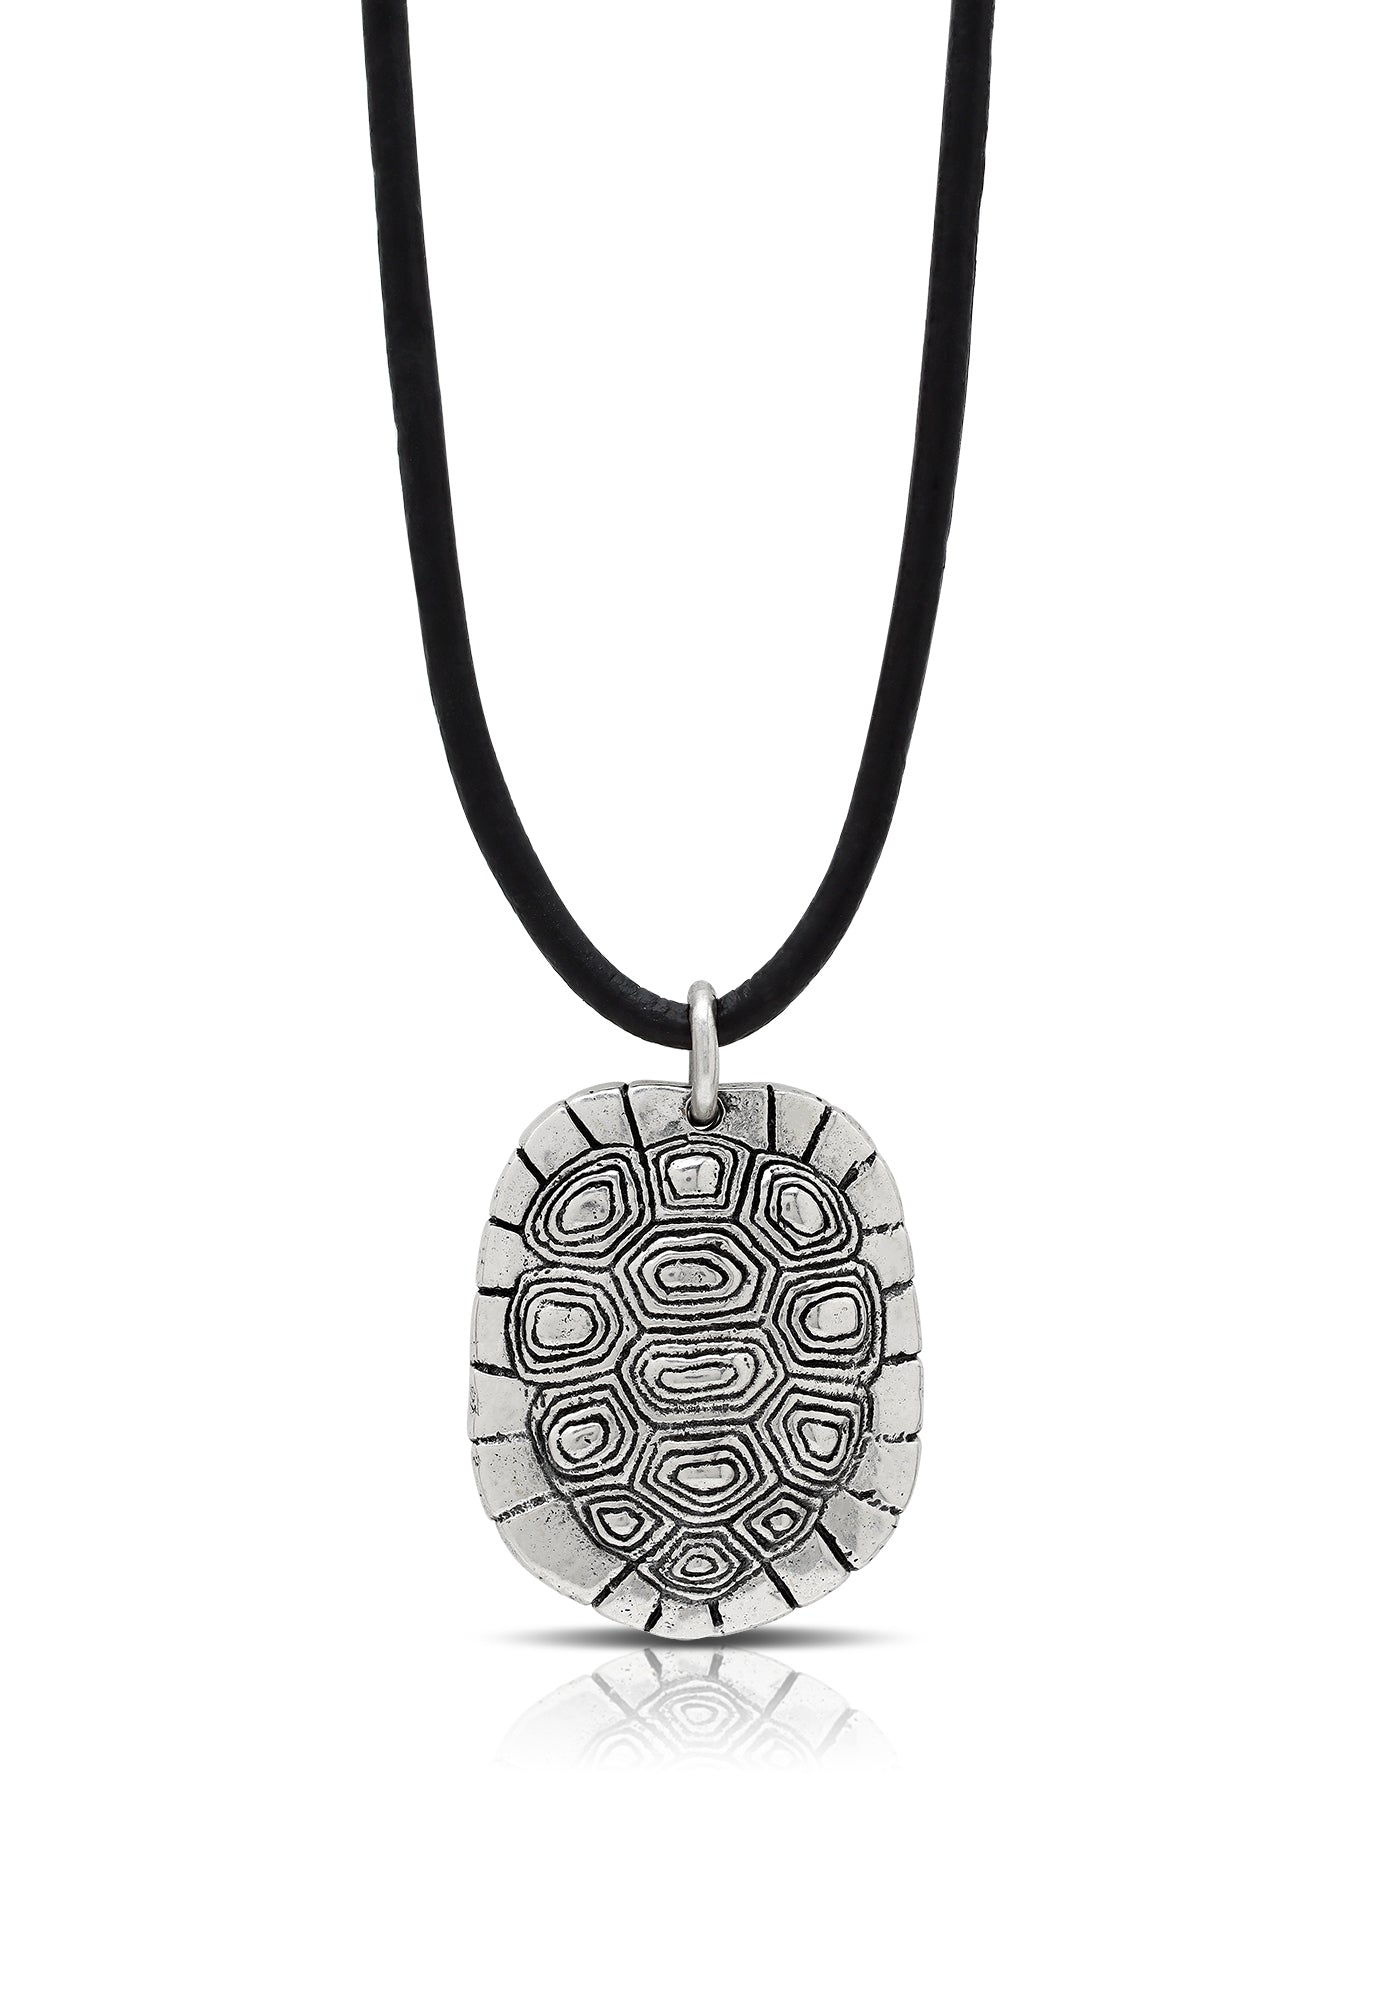 Turtle Texture Black Leather Cord Necklace Sterling Silver